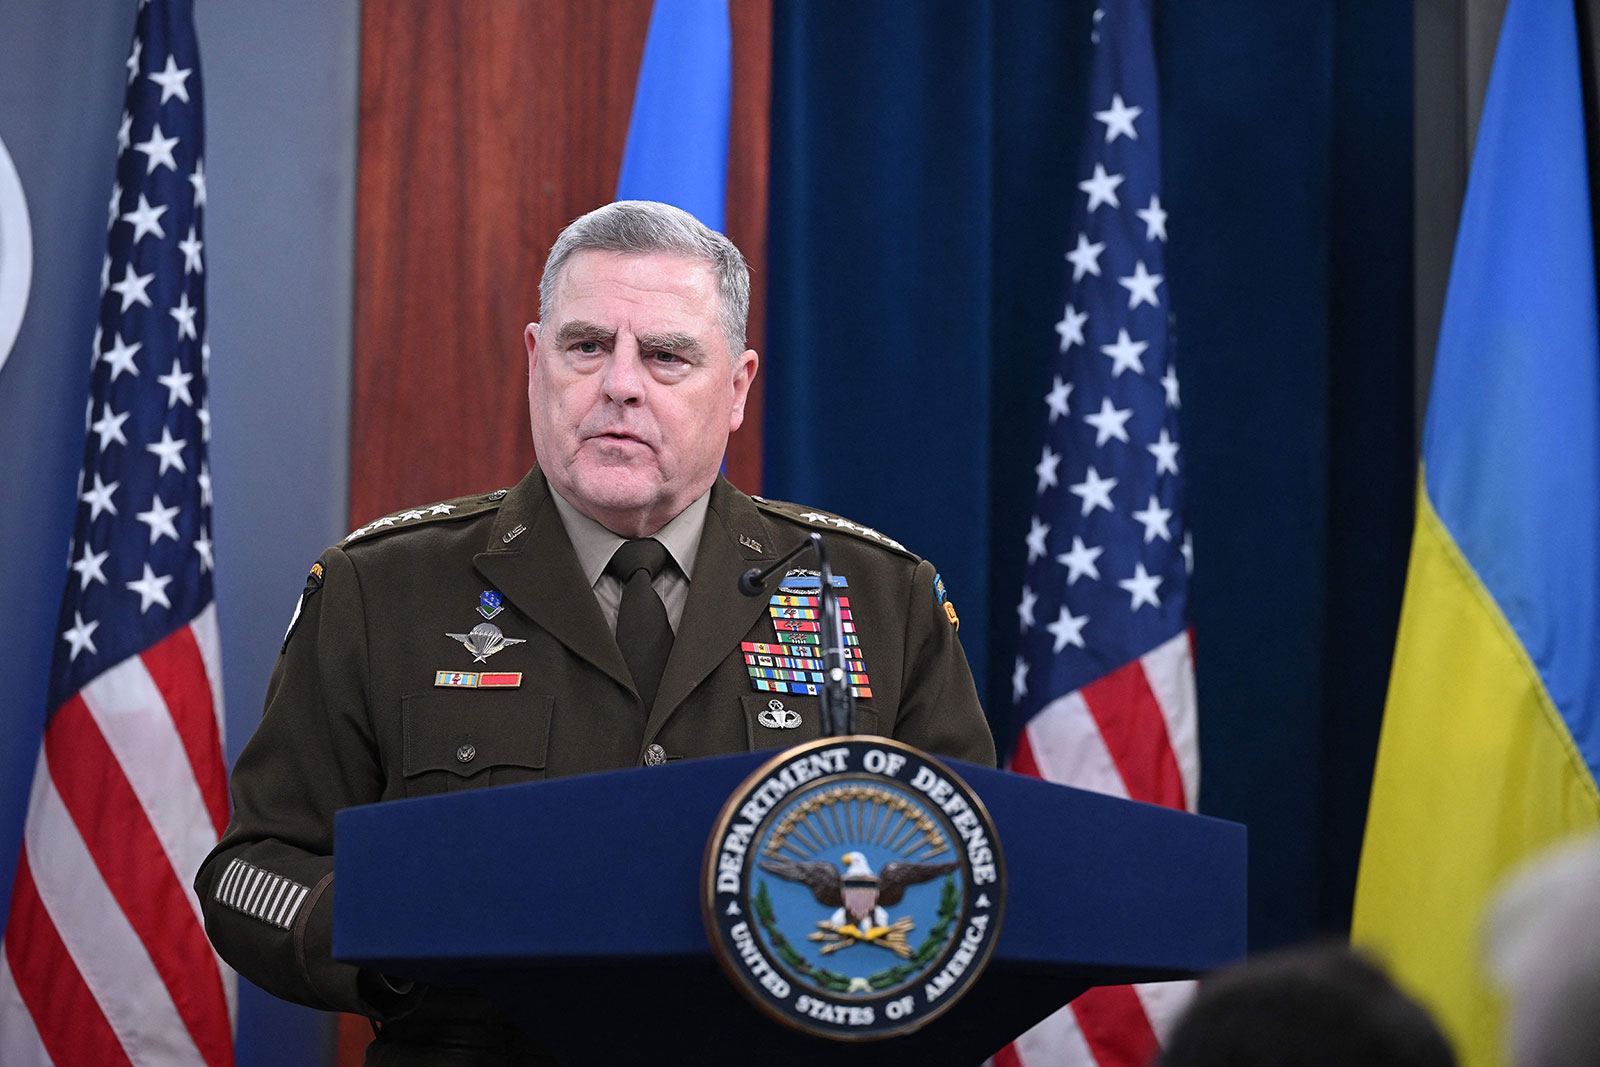 Chairman of the Joint Chiefs of Staff General Mark Milley speaks at a press conference at the Pentagon in Washington, DC, on November 16.